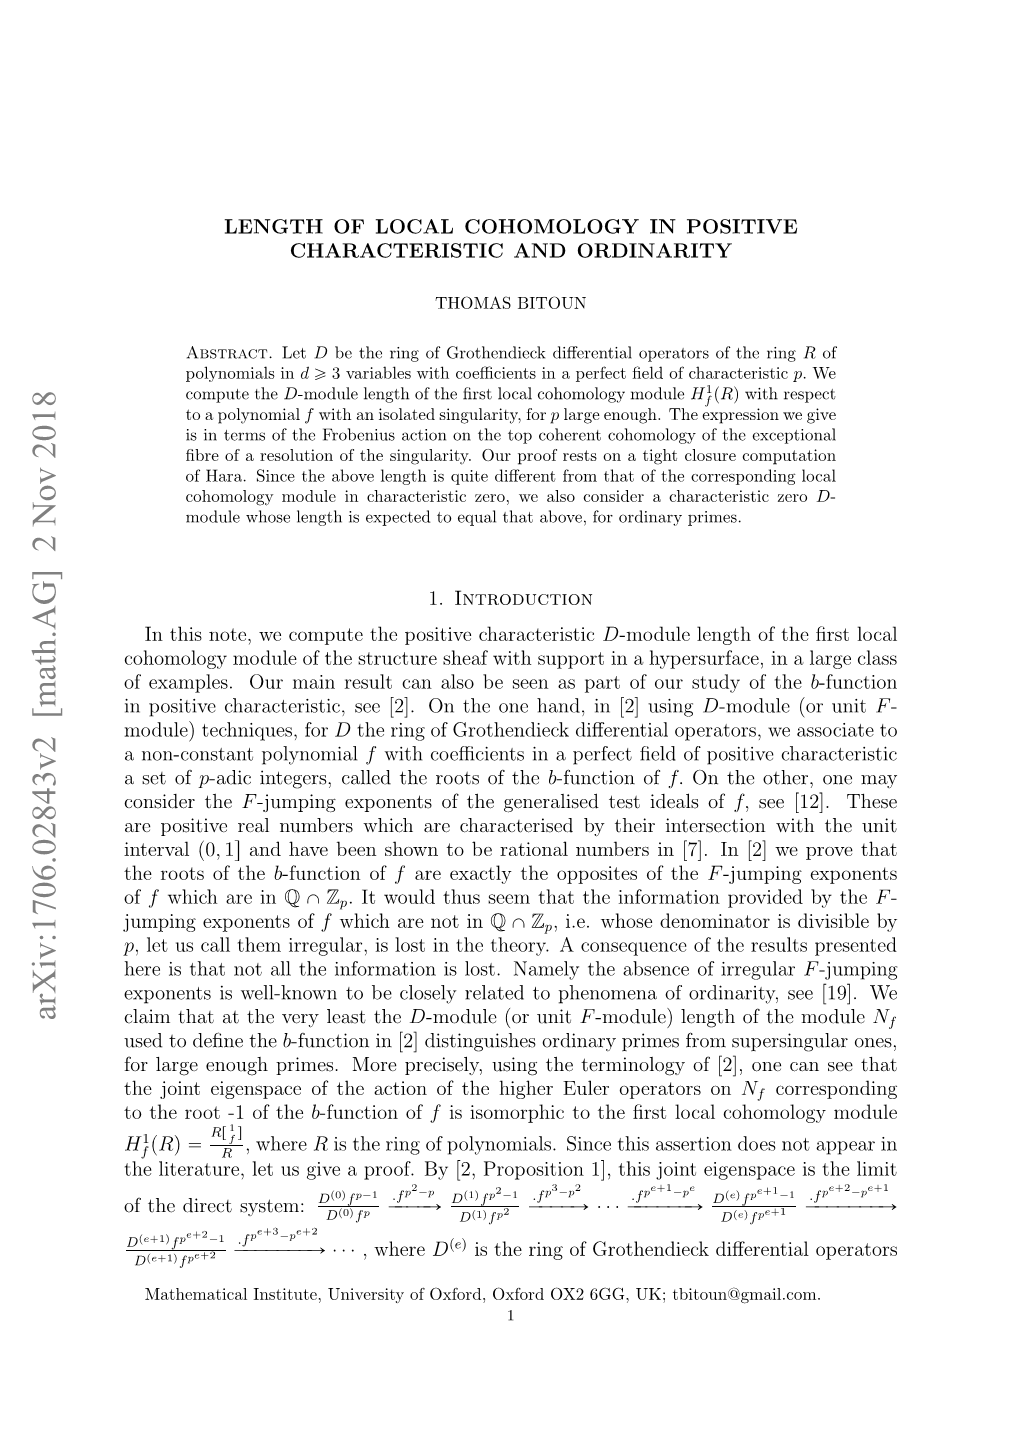 Length of Local Cohomology in Positive Characteristic and Ordinarity 3